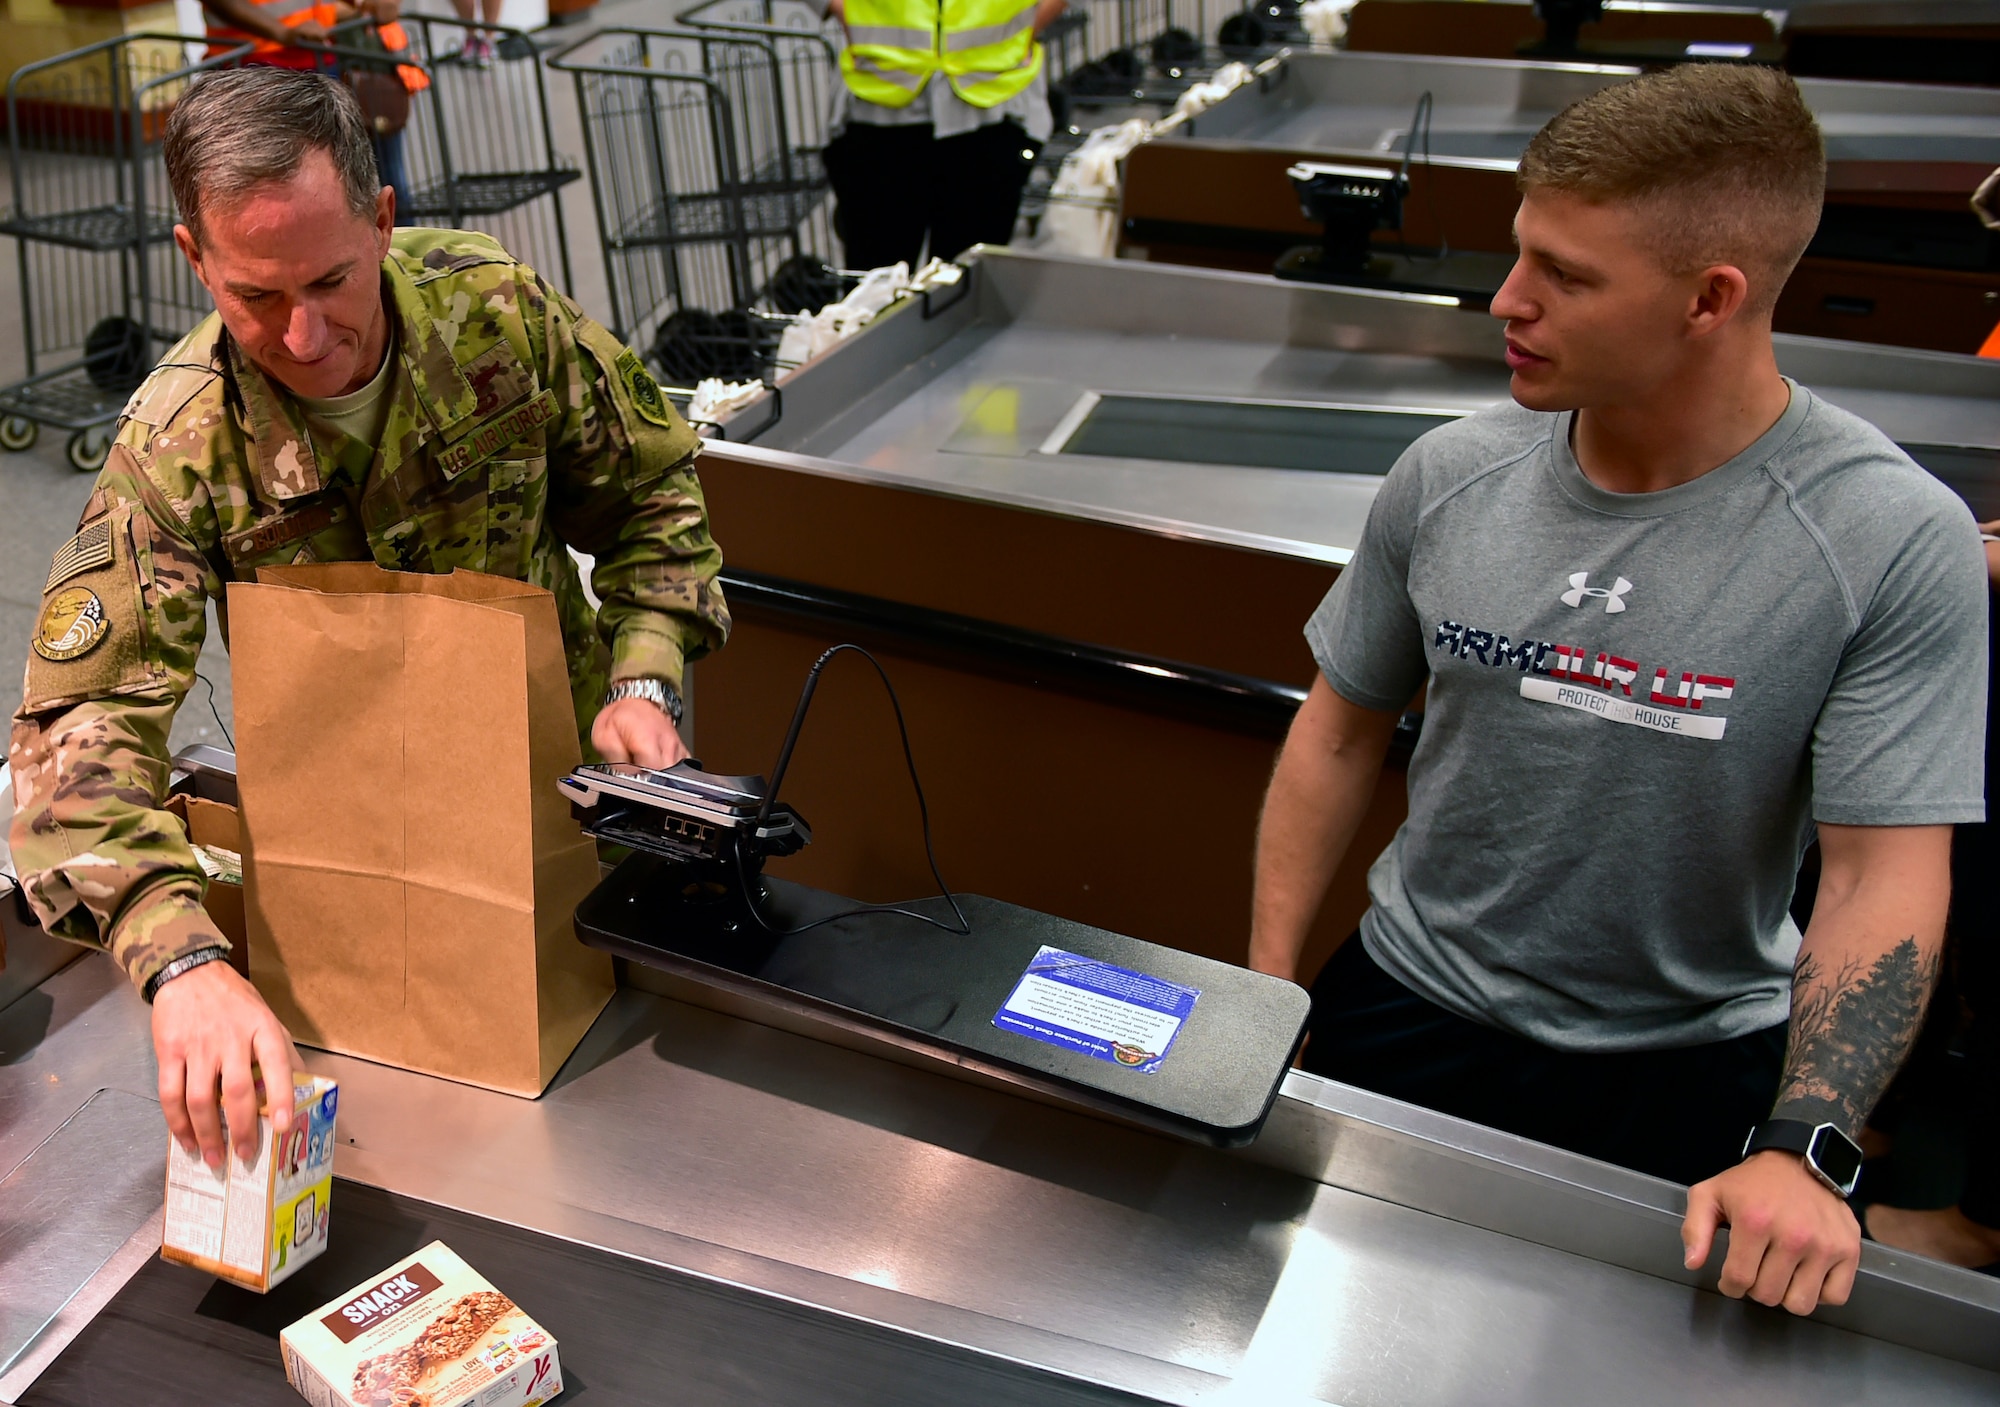 Air Force Chief of Staff Gen. David L. Goldfein bags groceries for an Airman at the commissary on Ramstein Air Base, Germany, Aug. 21, 2017. Gen. Goldfein worked as a bagger at the Ramstein commissary as a teenager. He passed through Ramstein on his way back to the states after visiting Airmen at several locations in the Middle East.